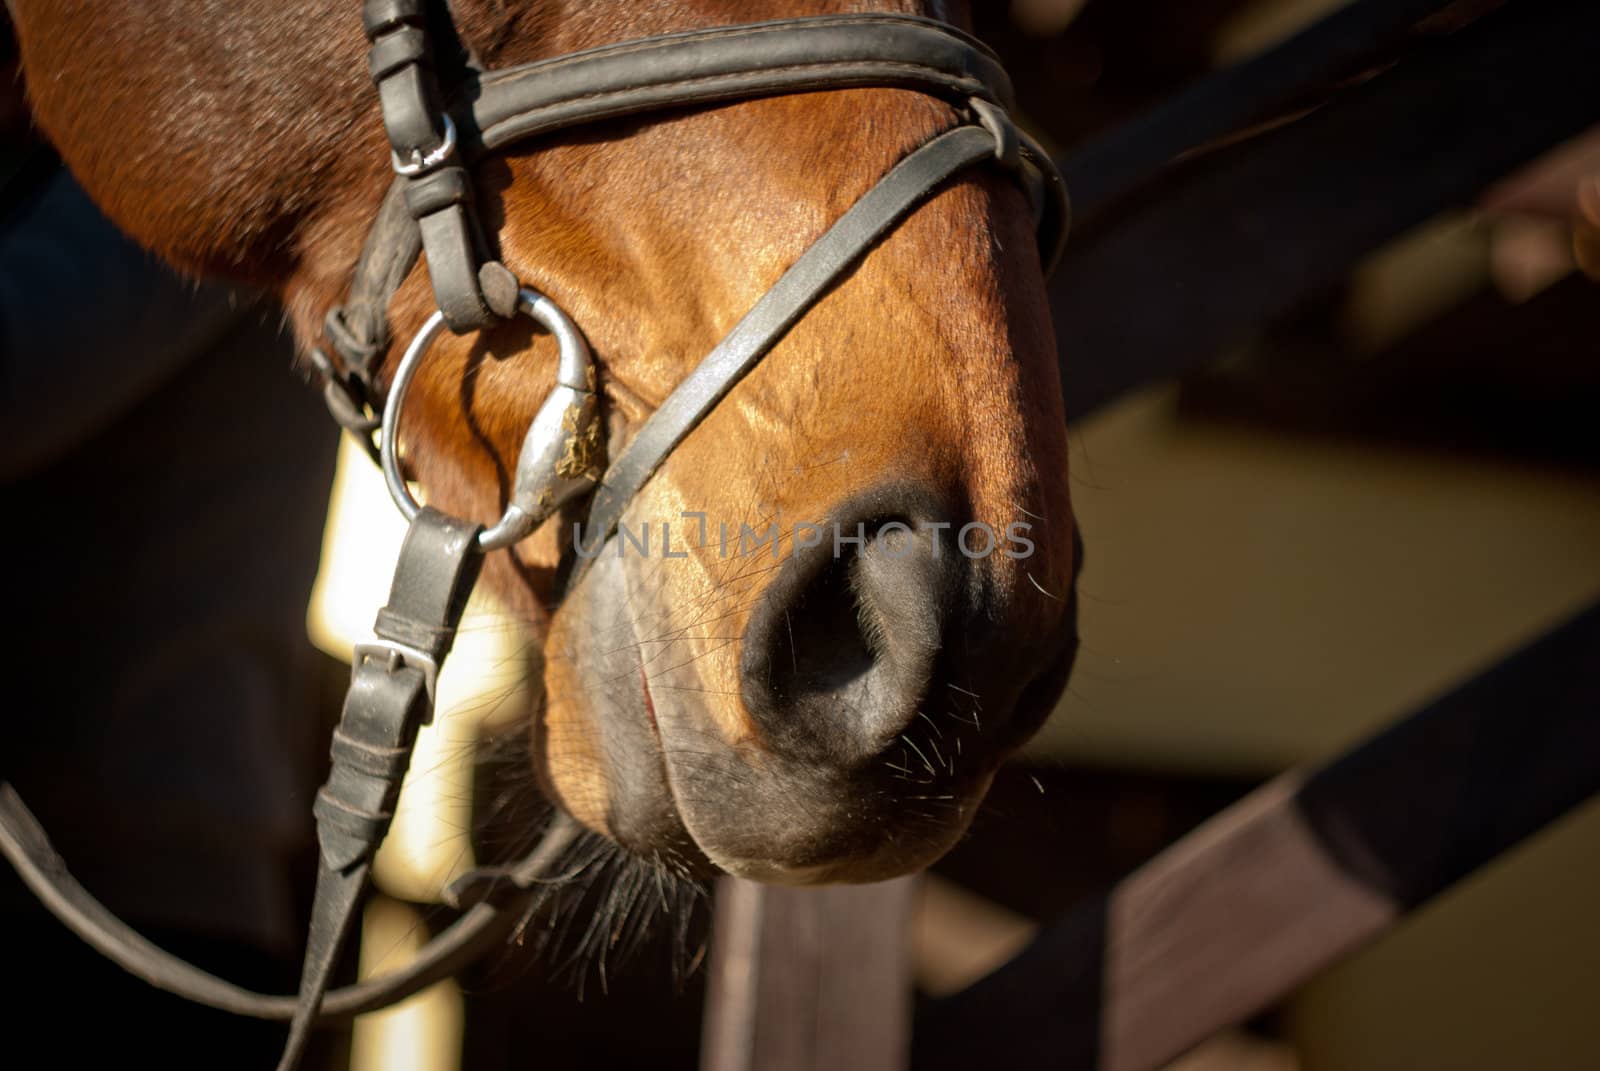 nostrils of a horse harness by RobertHardy